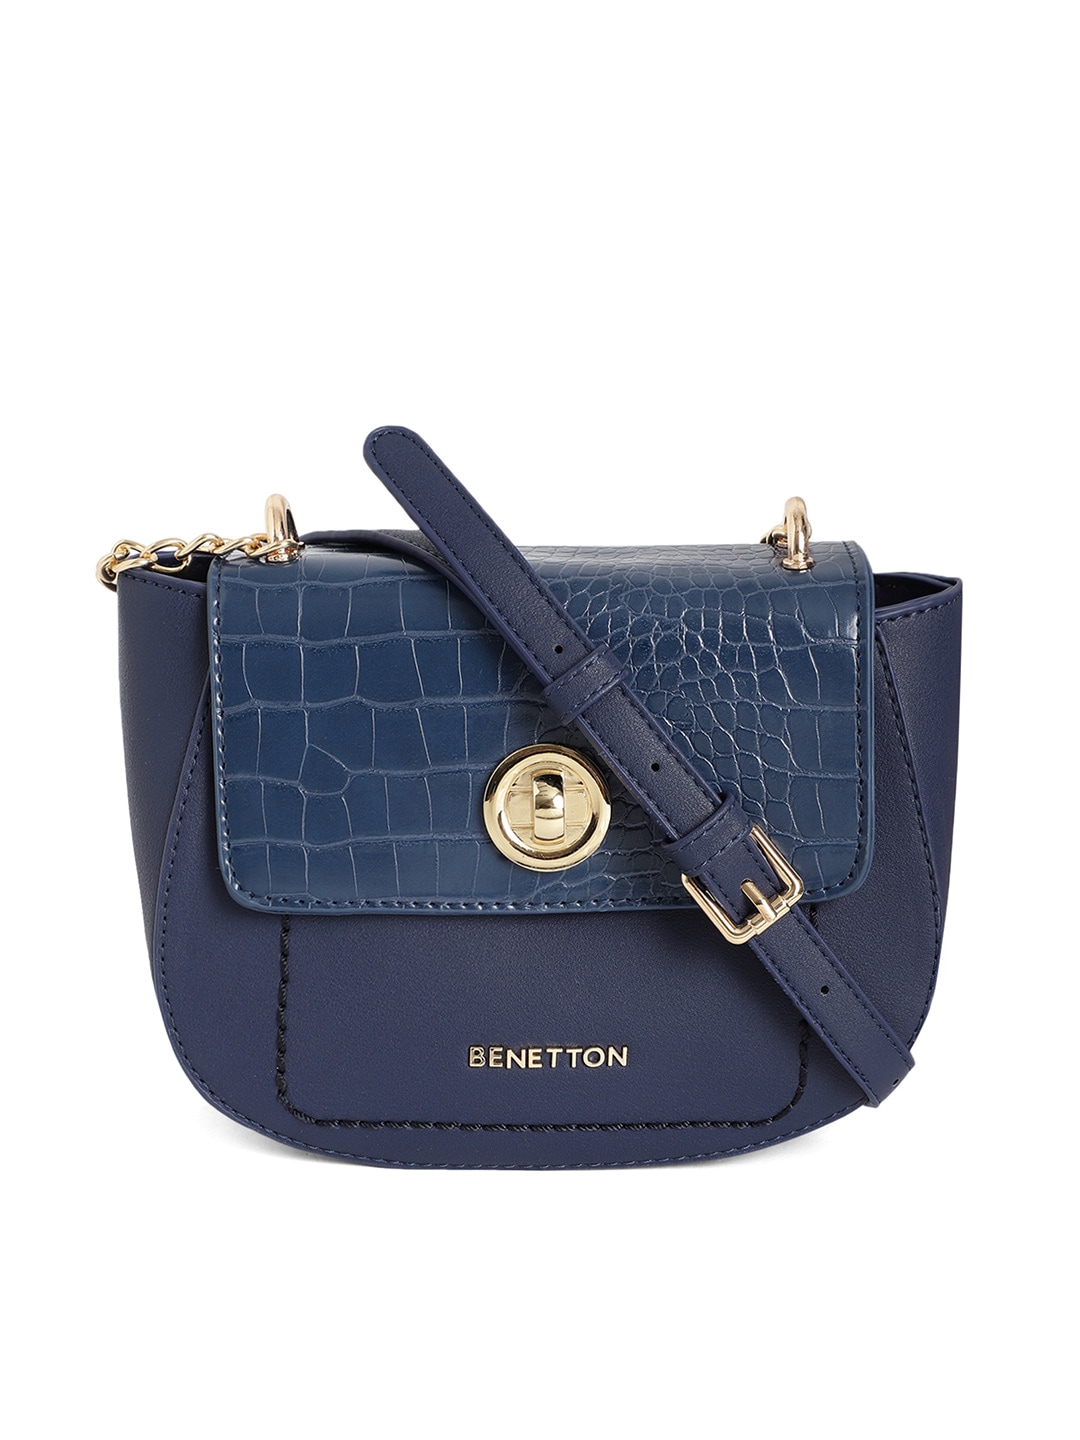 United Colors of Benetton Blue Animal Textured Half Moon Sling Bag Price in India